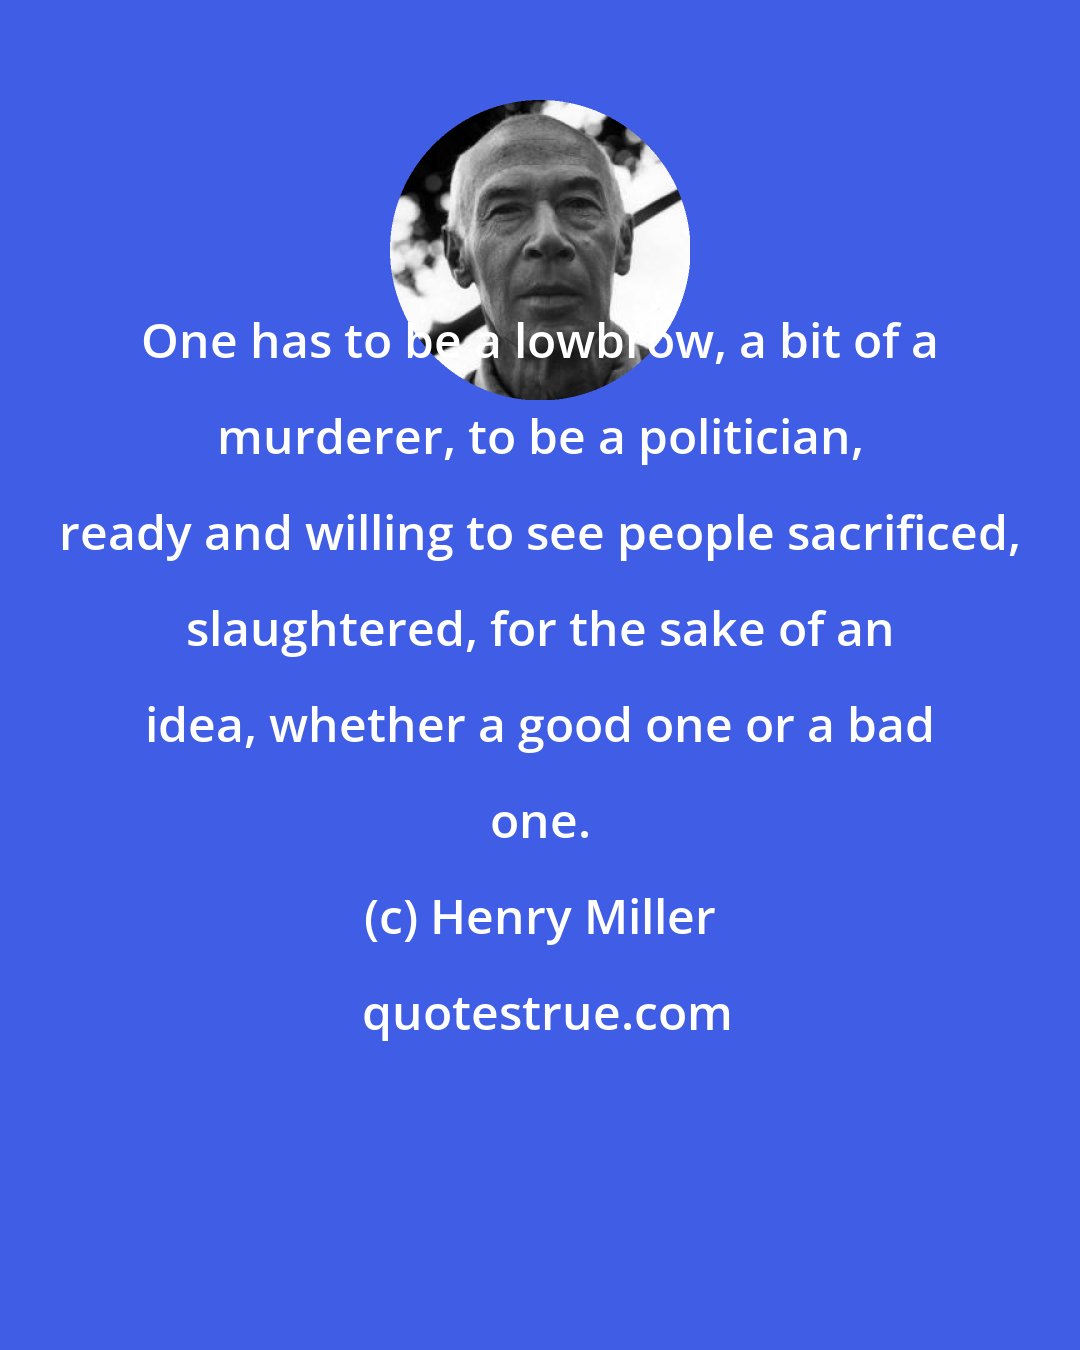 Henry Miller: One has to be a lowbrow, a bit of a murderer, to be a politician, ready and willing to see people sacrificed, slaughtered, for the sake of an idea, whether a good one or a bad one.